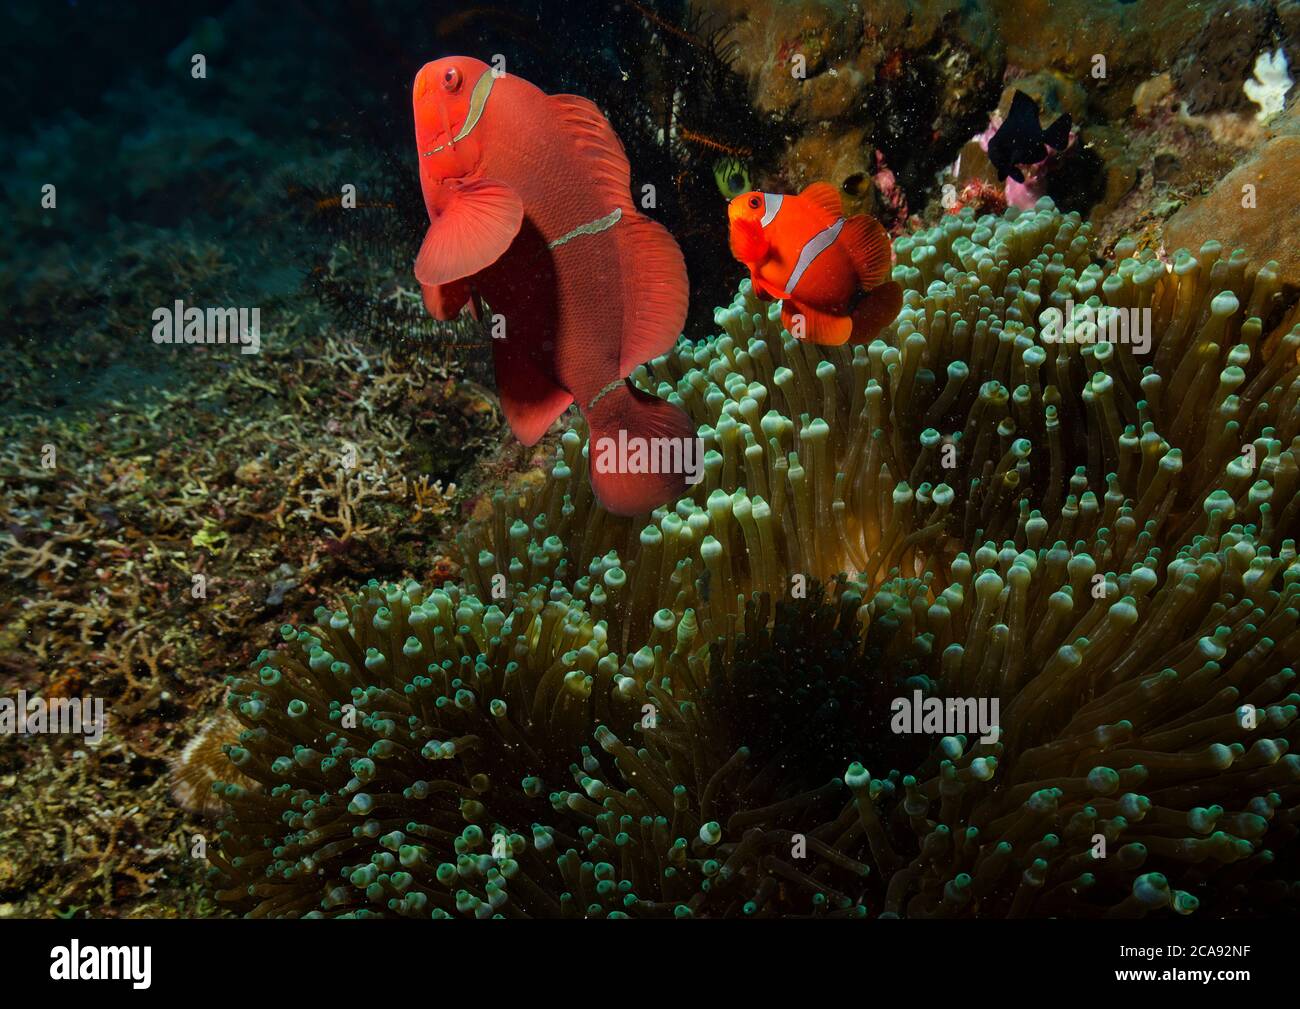 Spinecheek Anemonefish, Premnas biaculeatus, adult with young, sheltering in anemone, Tulamben, Bali Stock Photo